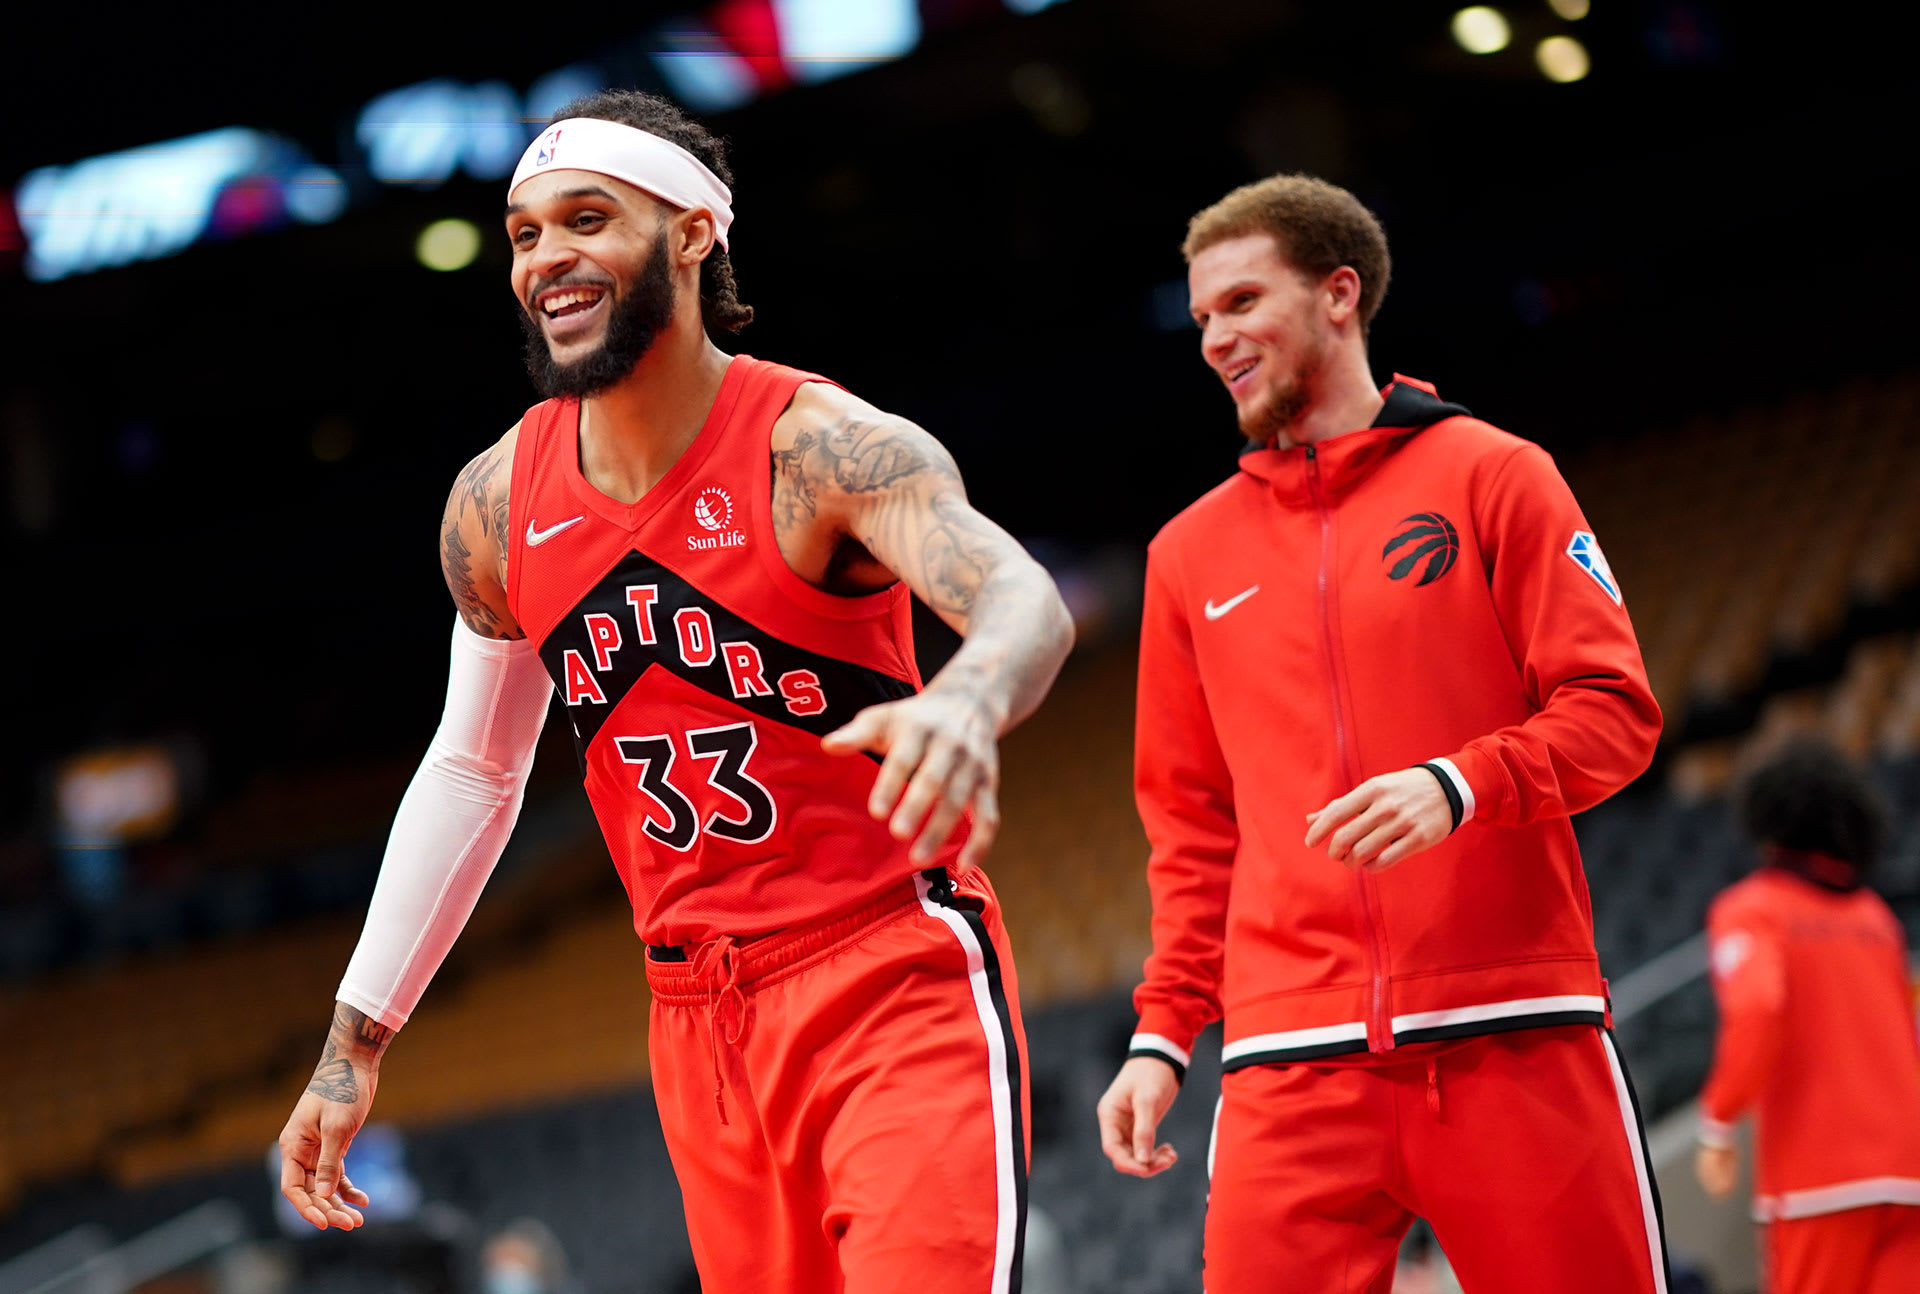 Gary Trent Jr. #33 and Malachi Flynn #22 of the Toronto Raptors smile before playing the Portland Trail Blazers